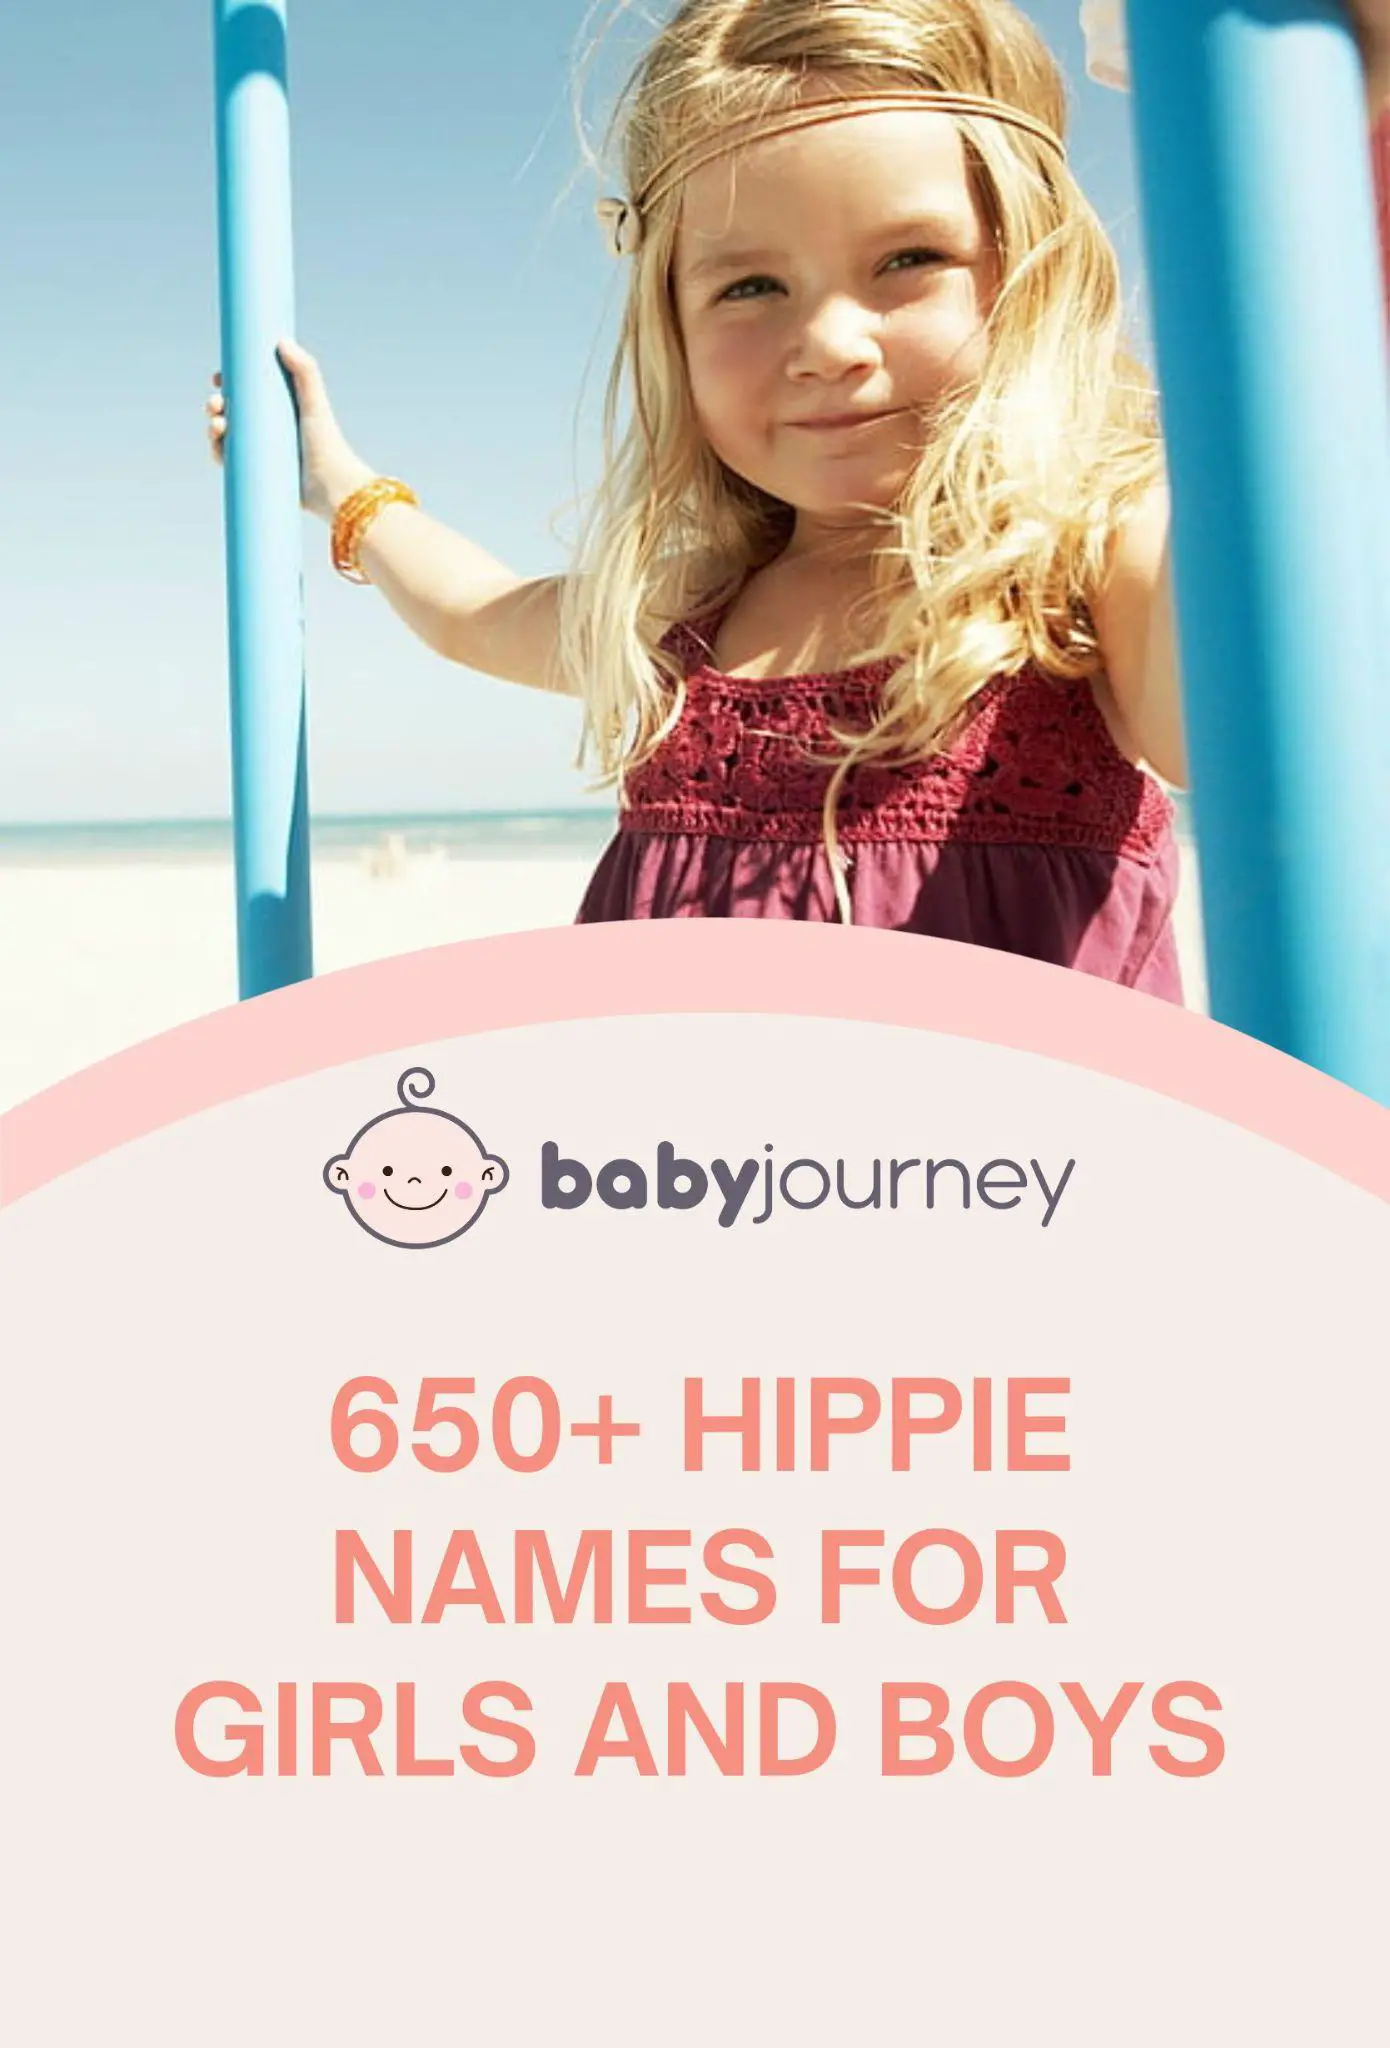 Alt text: 650+ Hippie Names for Girls and Boys pinterest - Baby Journey
